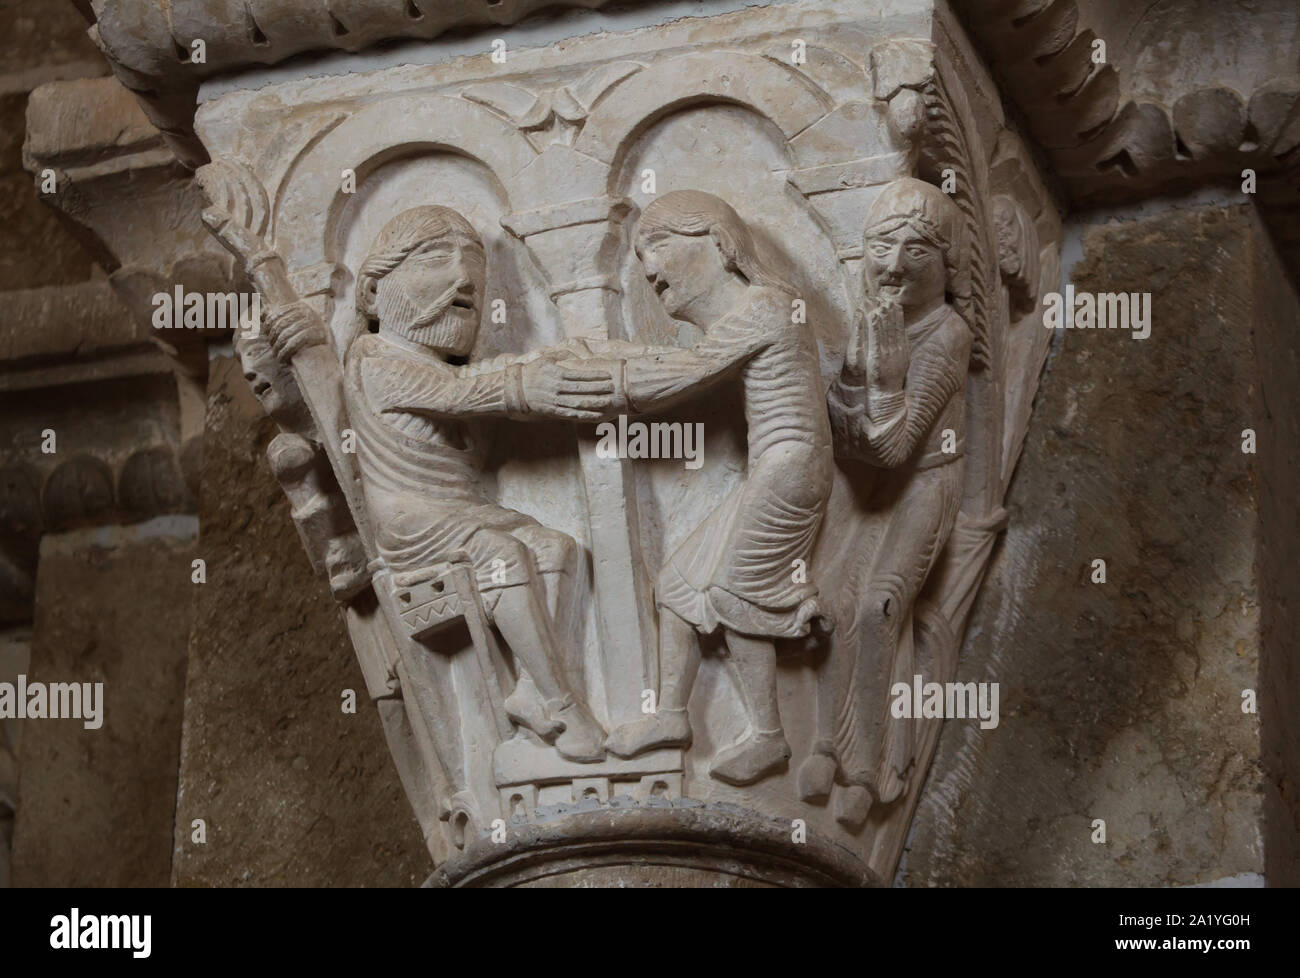 Isaac blessing Jacob depicted in the Romanesque capital dated from the 12th century in the Basilica of Saint Mary Magdalene (Basilique Sainte-Marie-Madeleine de Vézelay) of the Vézelay Abbey (Abbaye Sainte-Marie-Madeleine de Vézelay) in Vézelay, Burgundy, France. Stock Photo